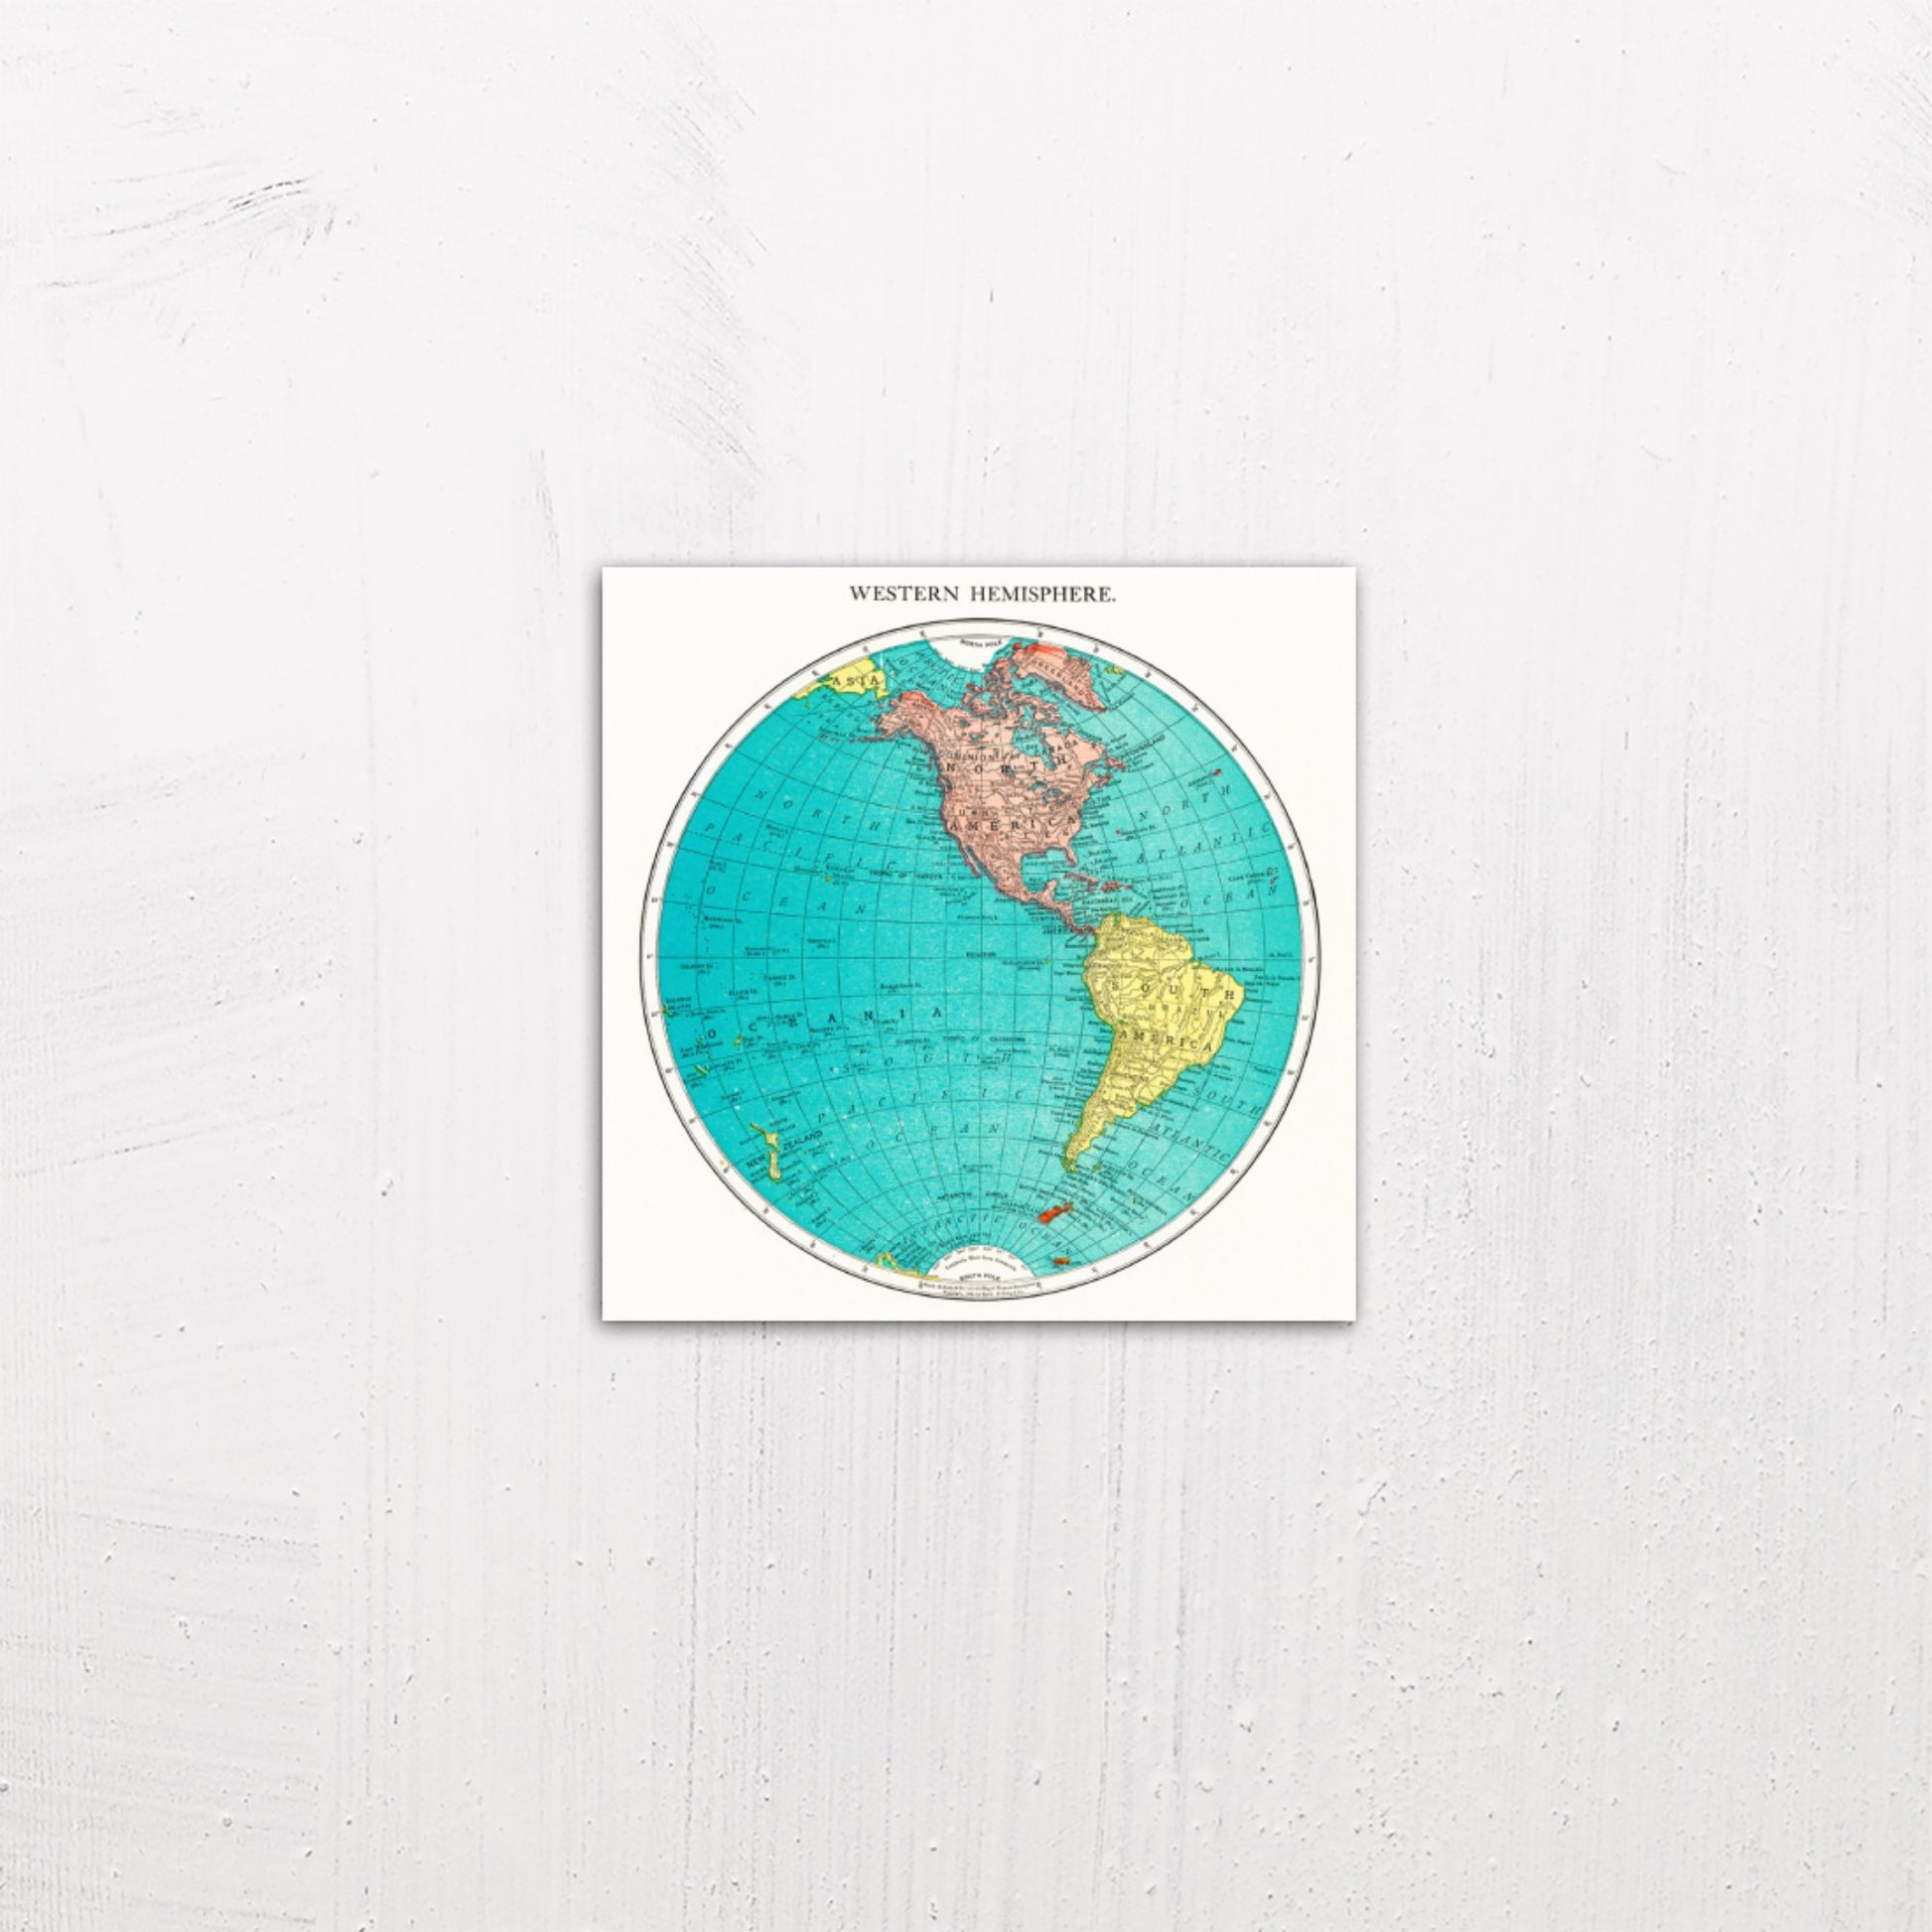 A small size metal art poster display plate with printed design of a Western Hemisphere, Vintage World Atlas by Rand McNally and Co (1908)